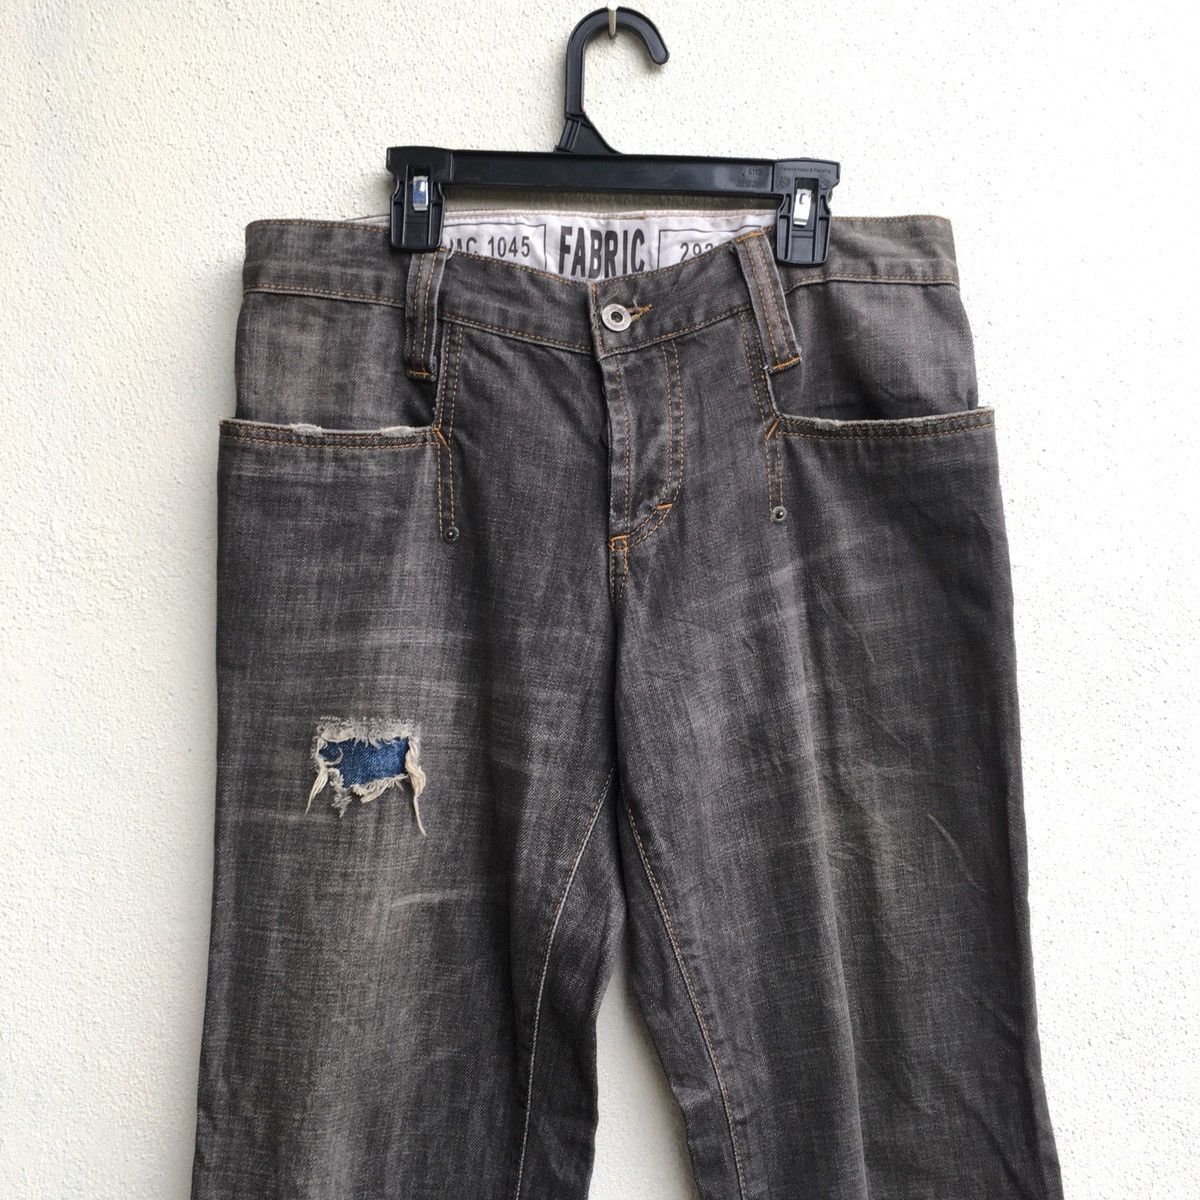 D&G FW05/06 Distressed Jeans - 2